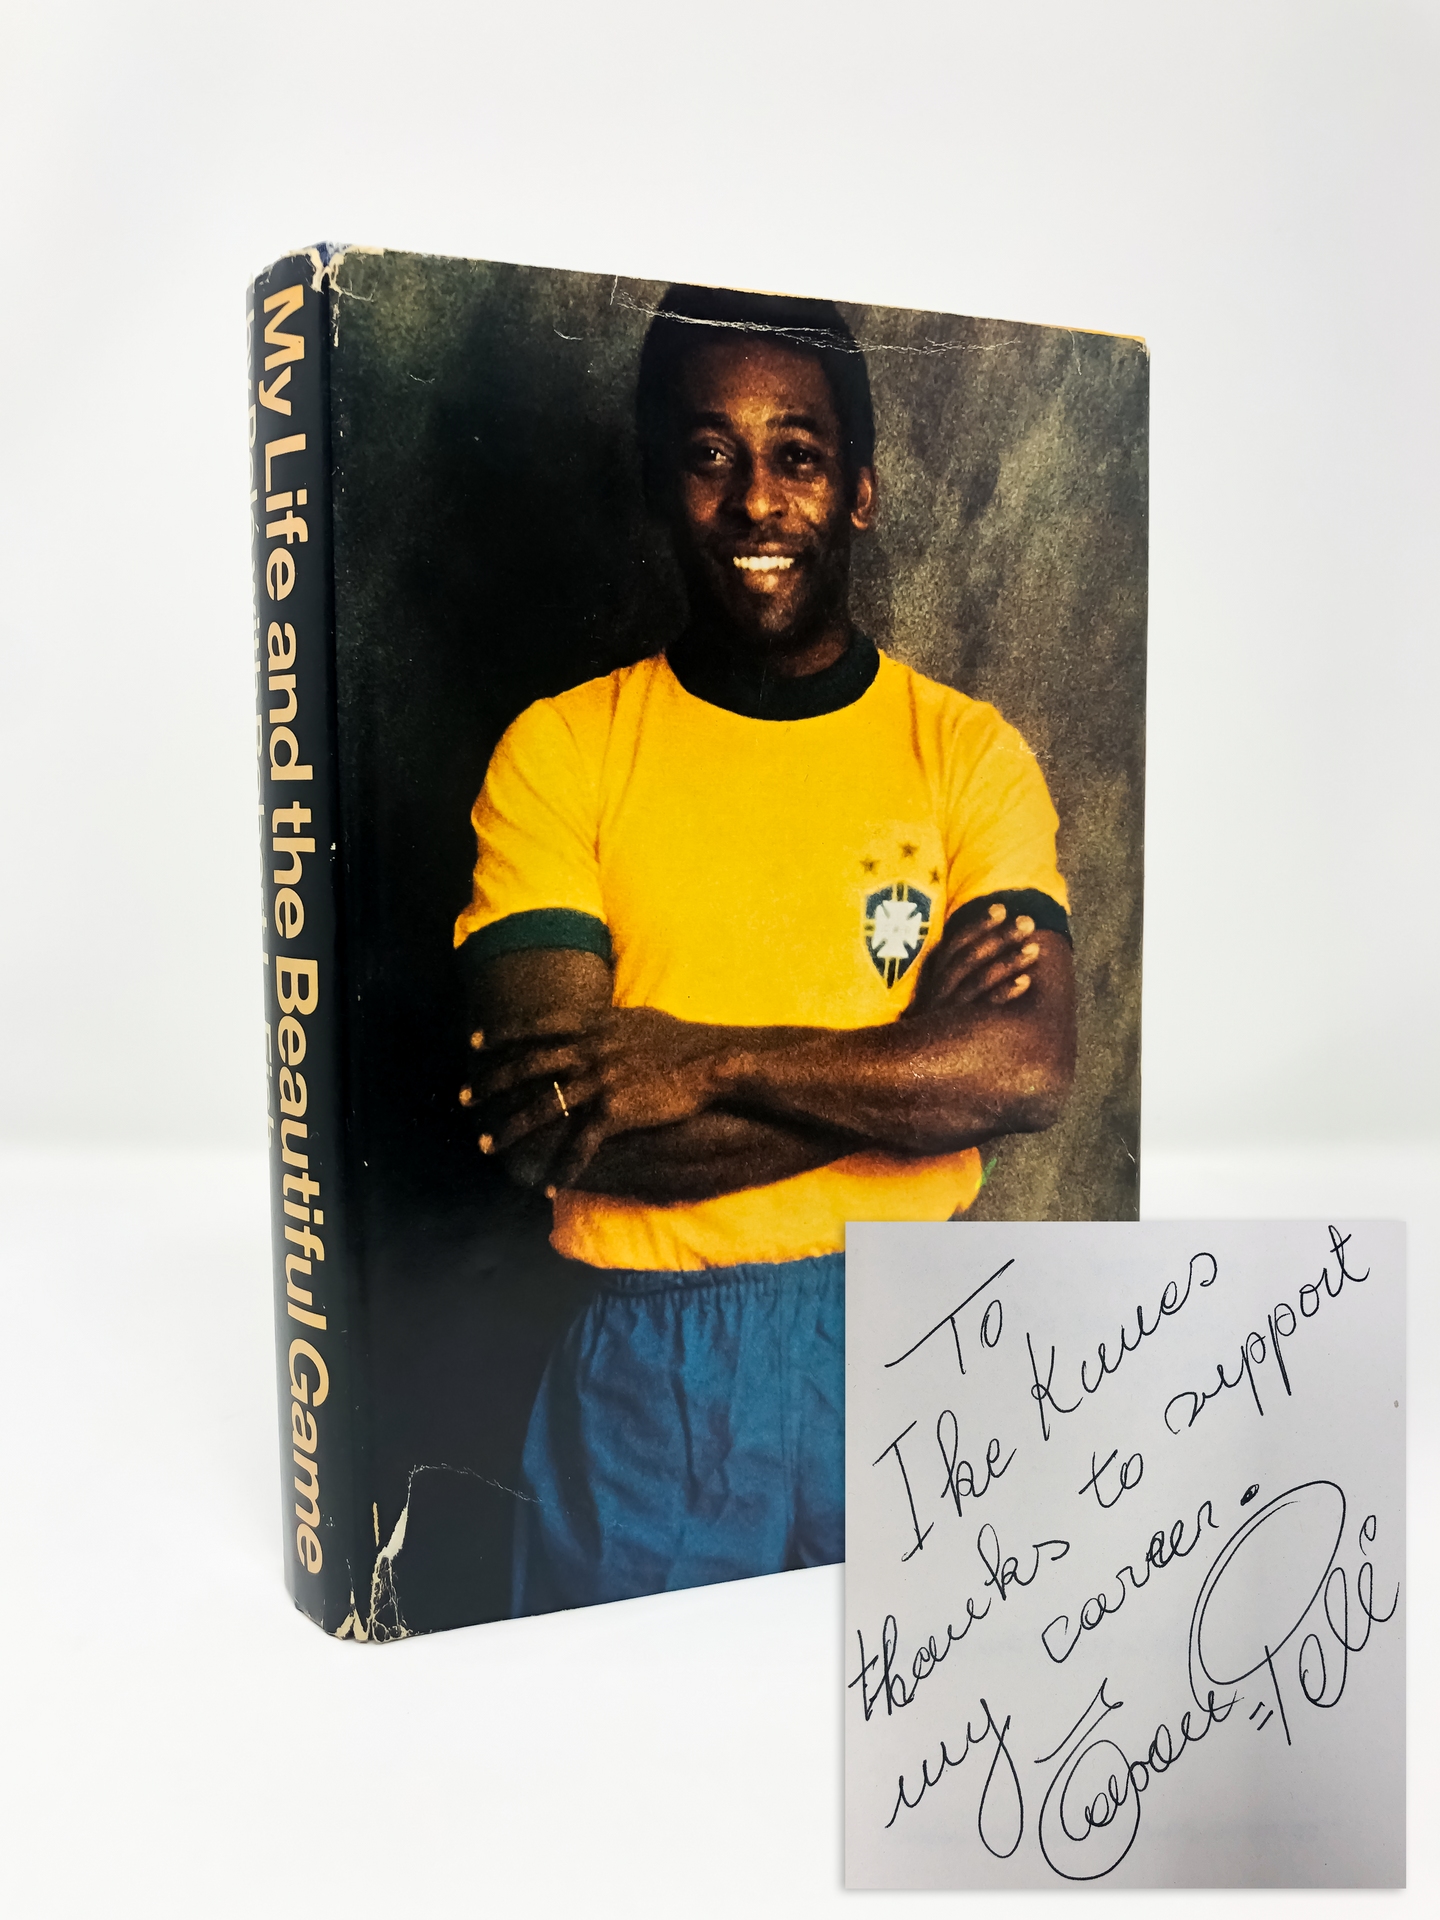 A signed first edition of My Life and the Beautiful Game by Pele